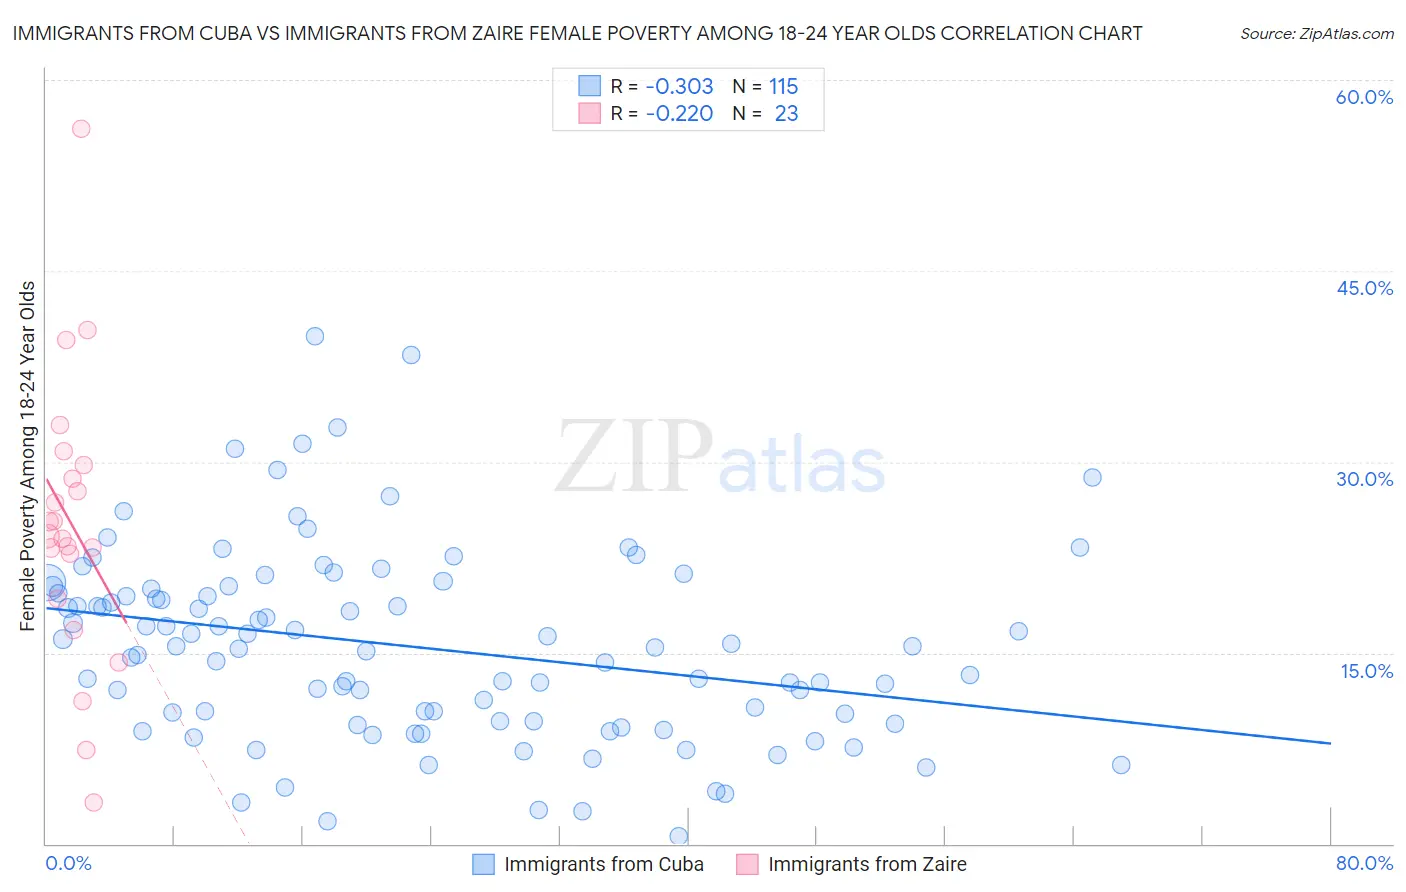 Immigrants from Cuba vs Immigrants from Zaire Female Poverty Among 18-24 Year Olds